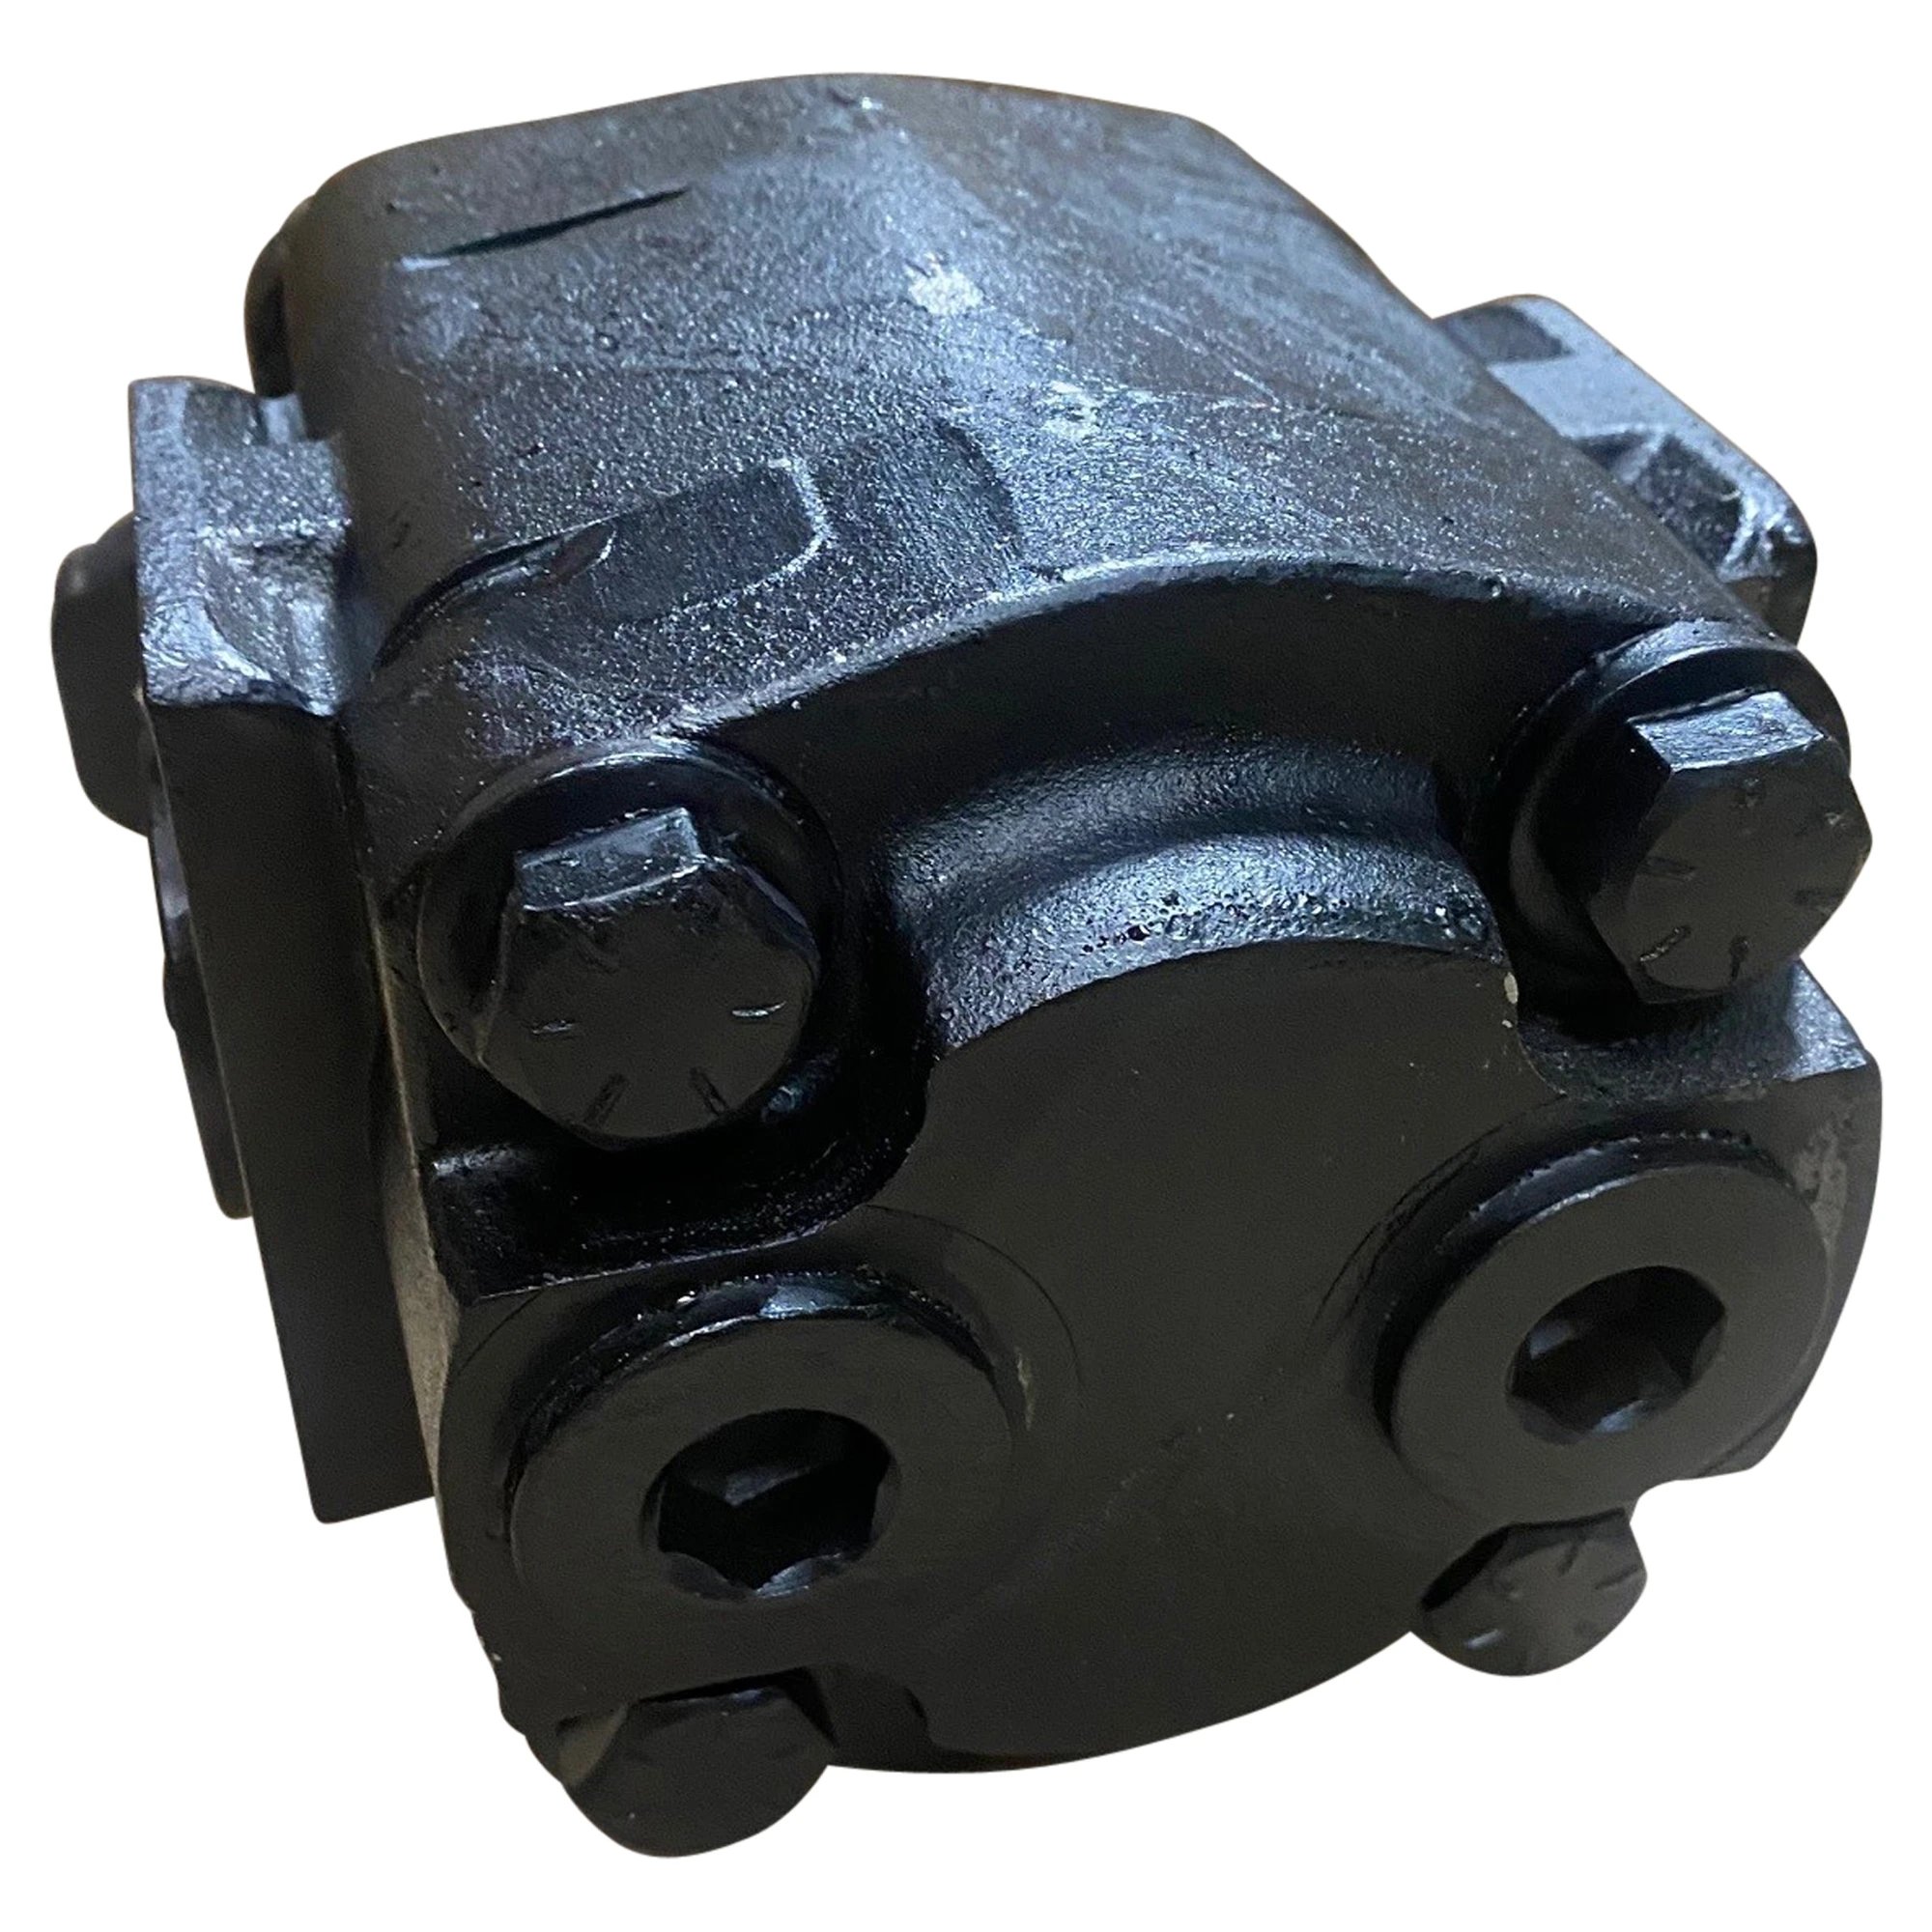 Wastebuilt® Replacement for New Way Pump\DM 20.5 GPM @ 1500 RPM